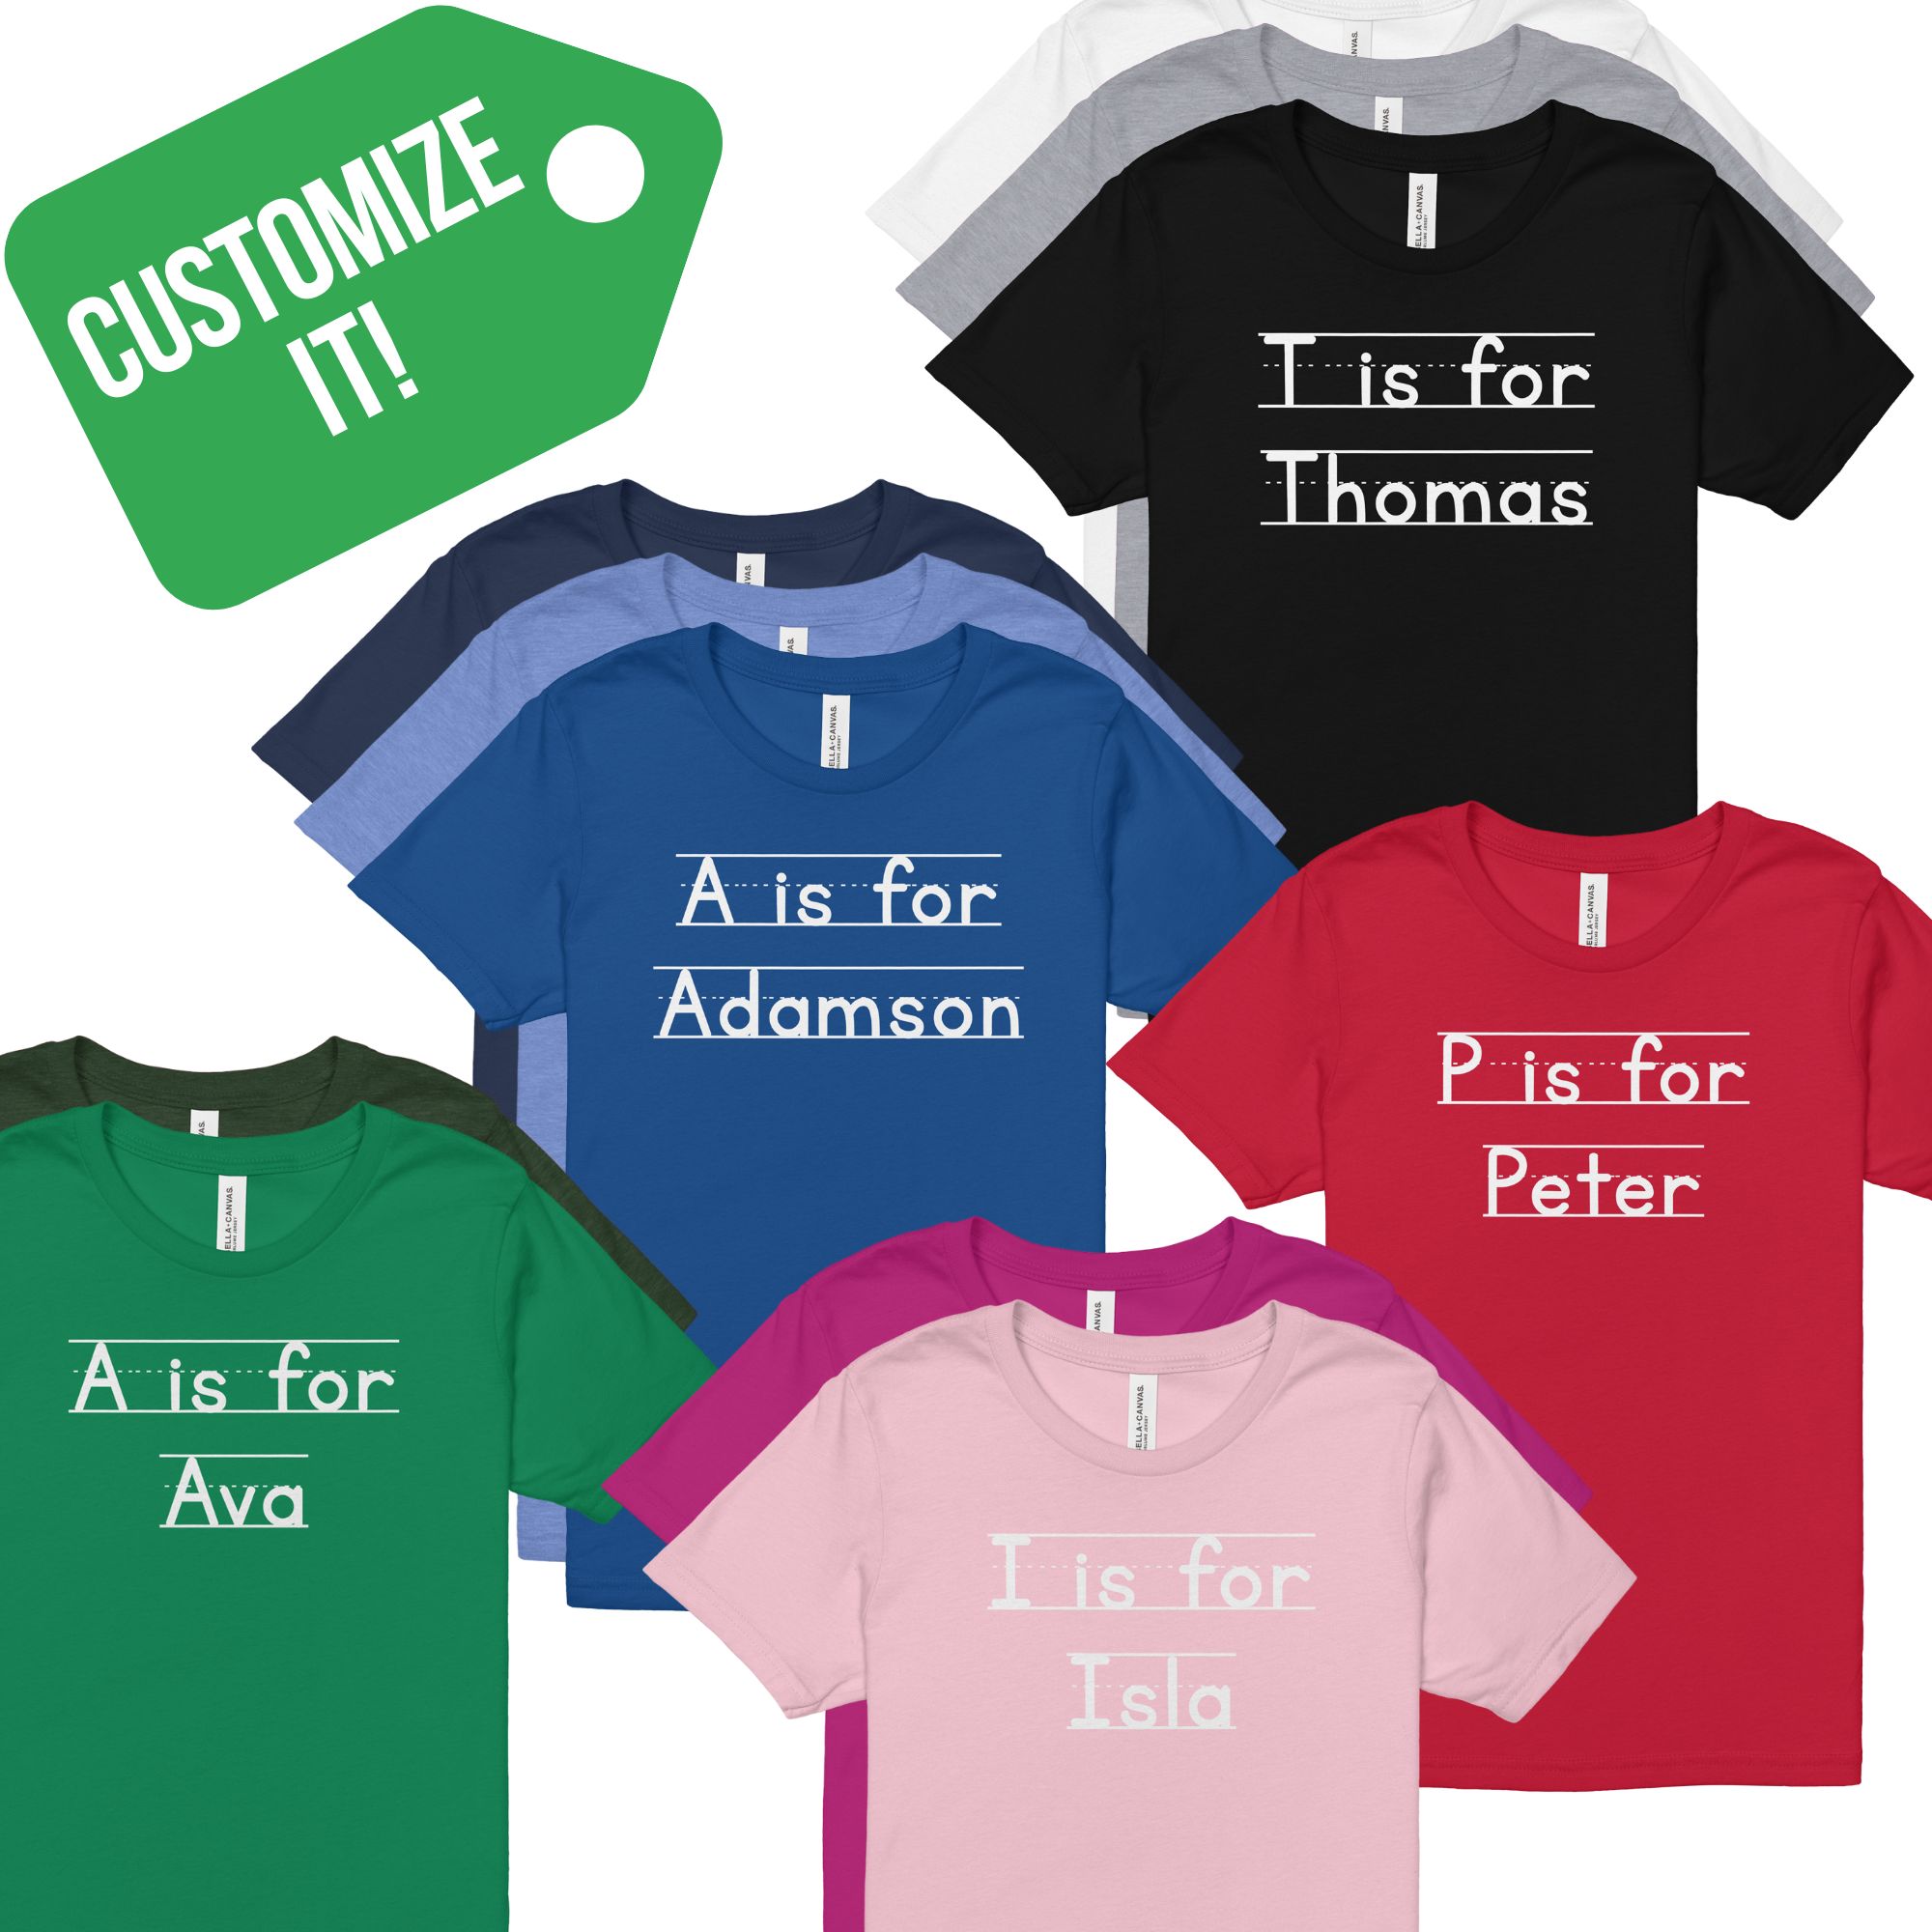 Y is for Yourname ((Personalized)) Kid's Tee - WRDMRK